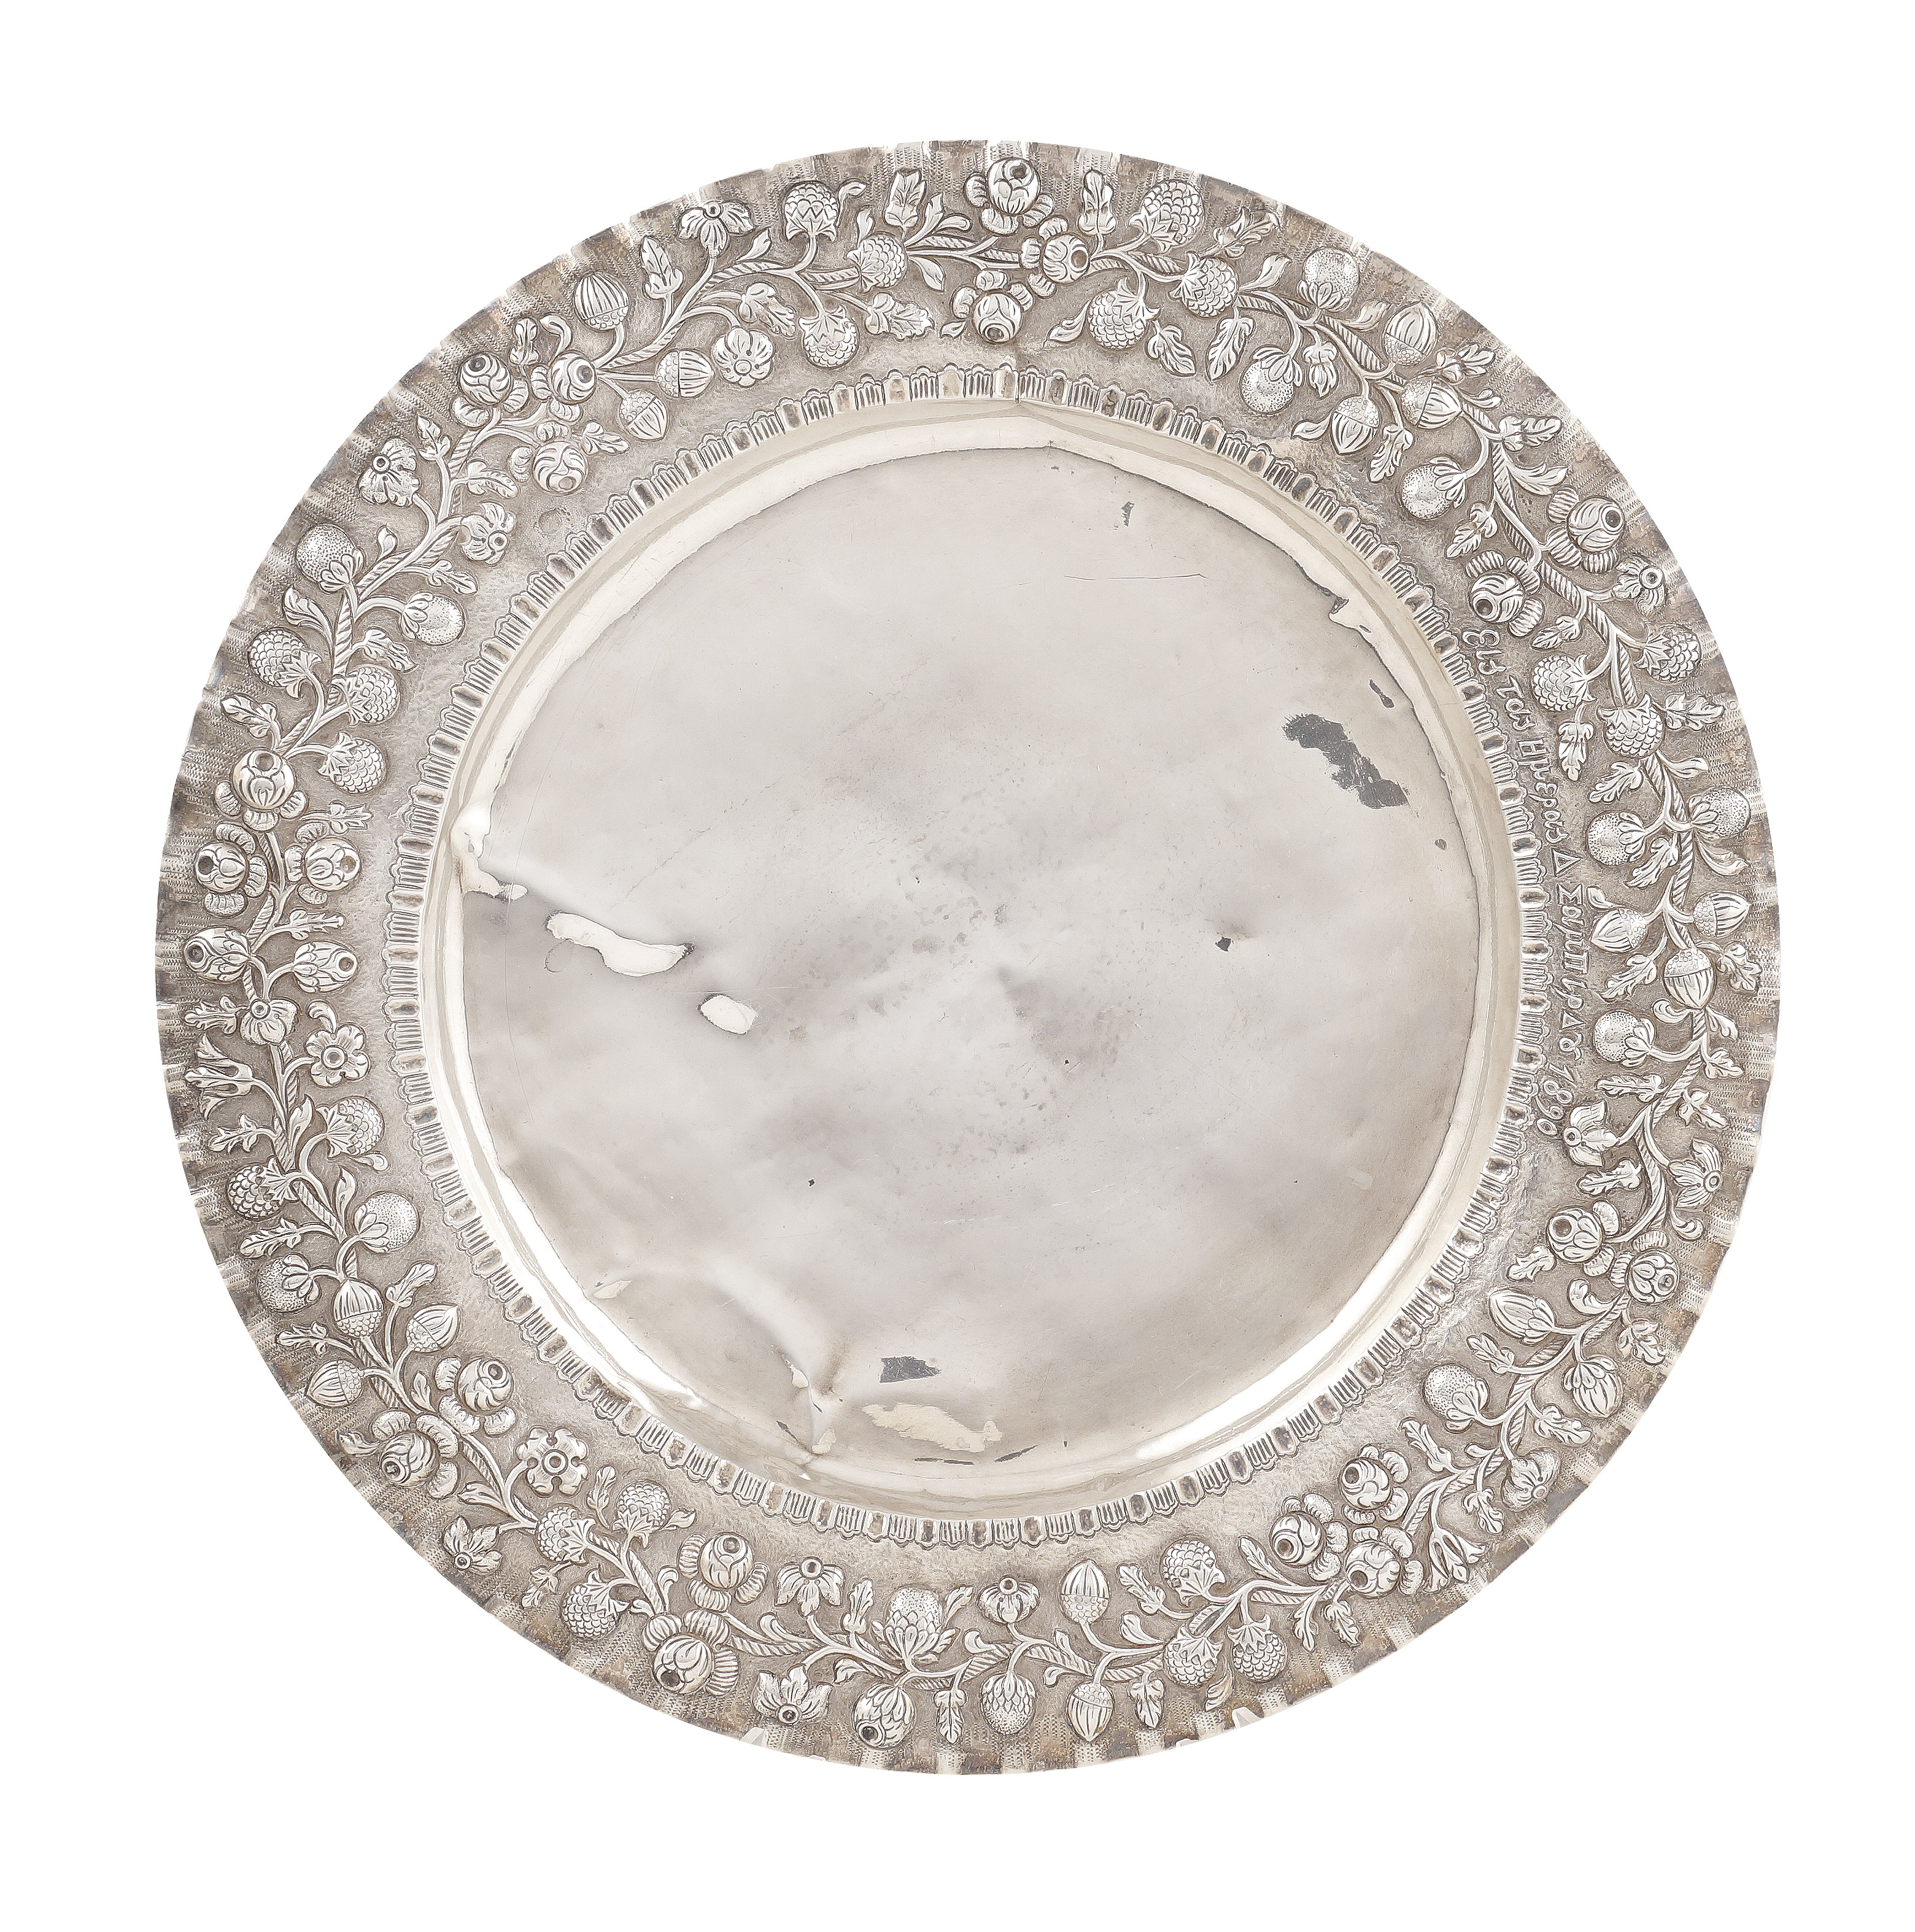 A silver plate late 19th century d. 41,5 cm.